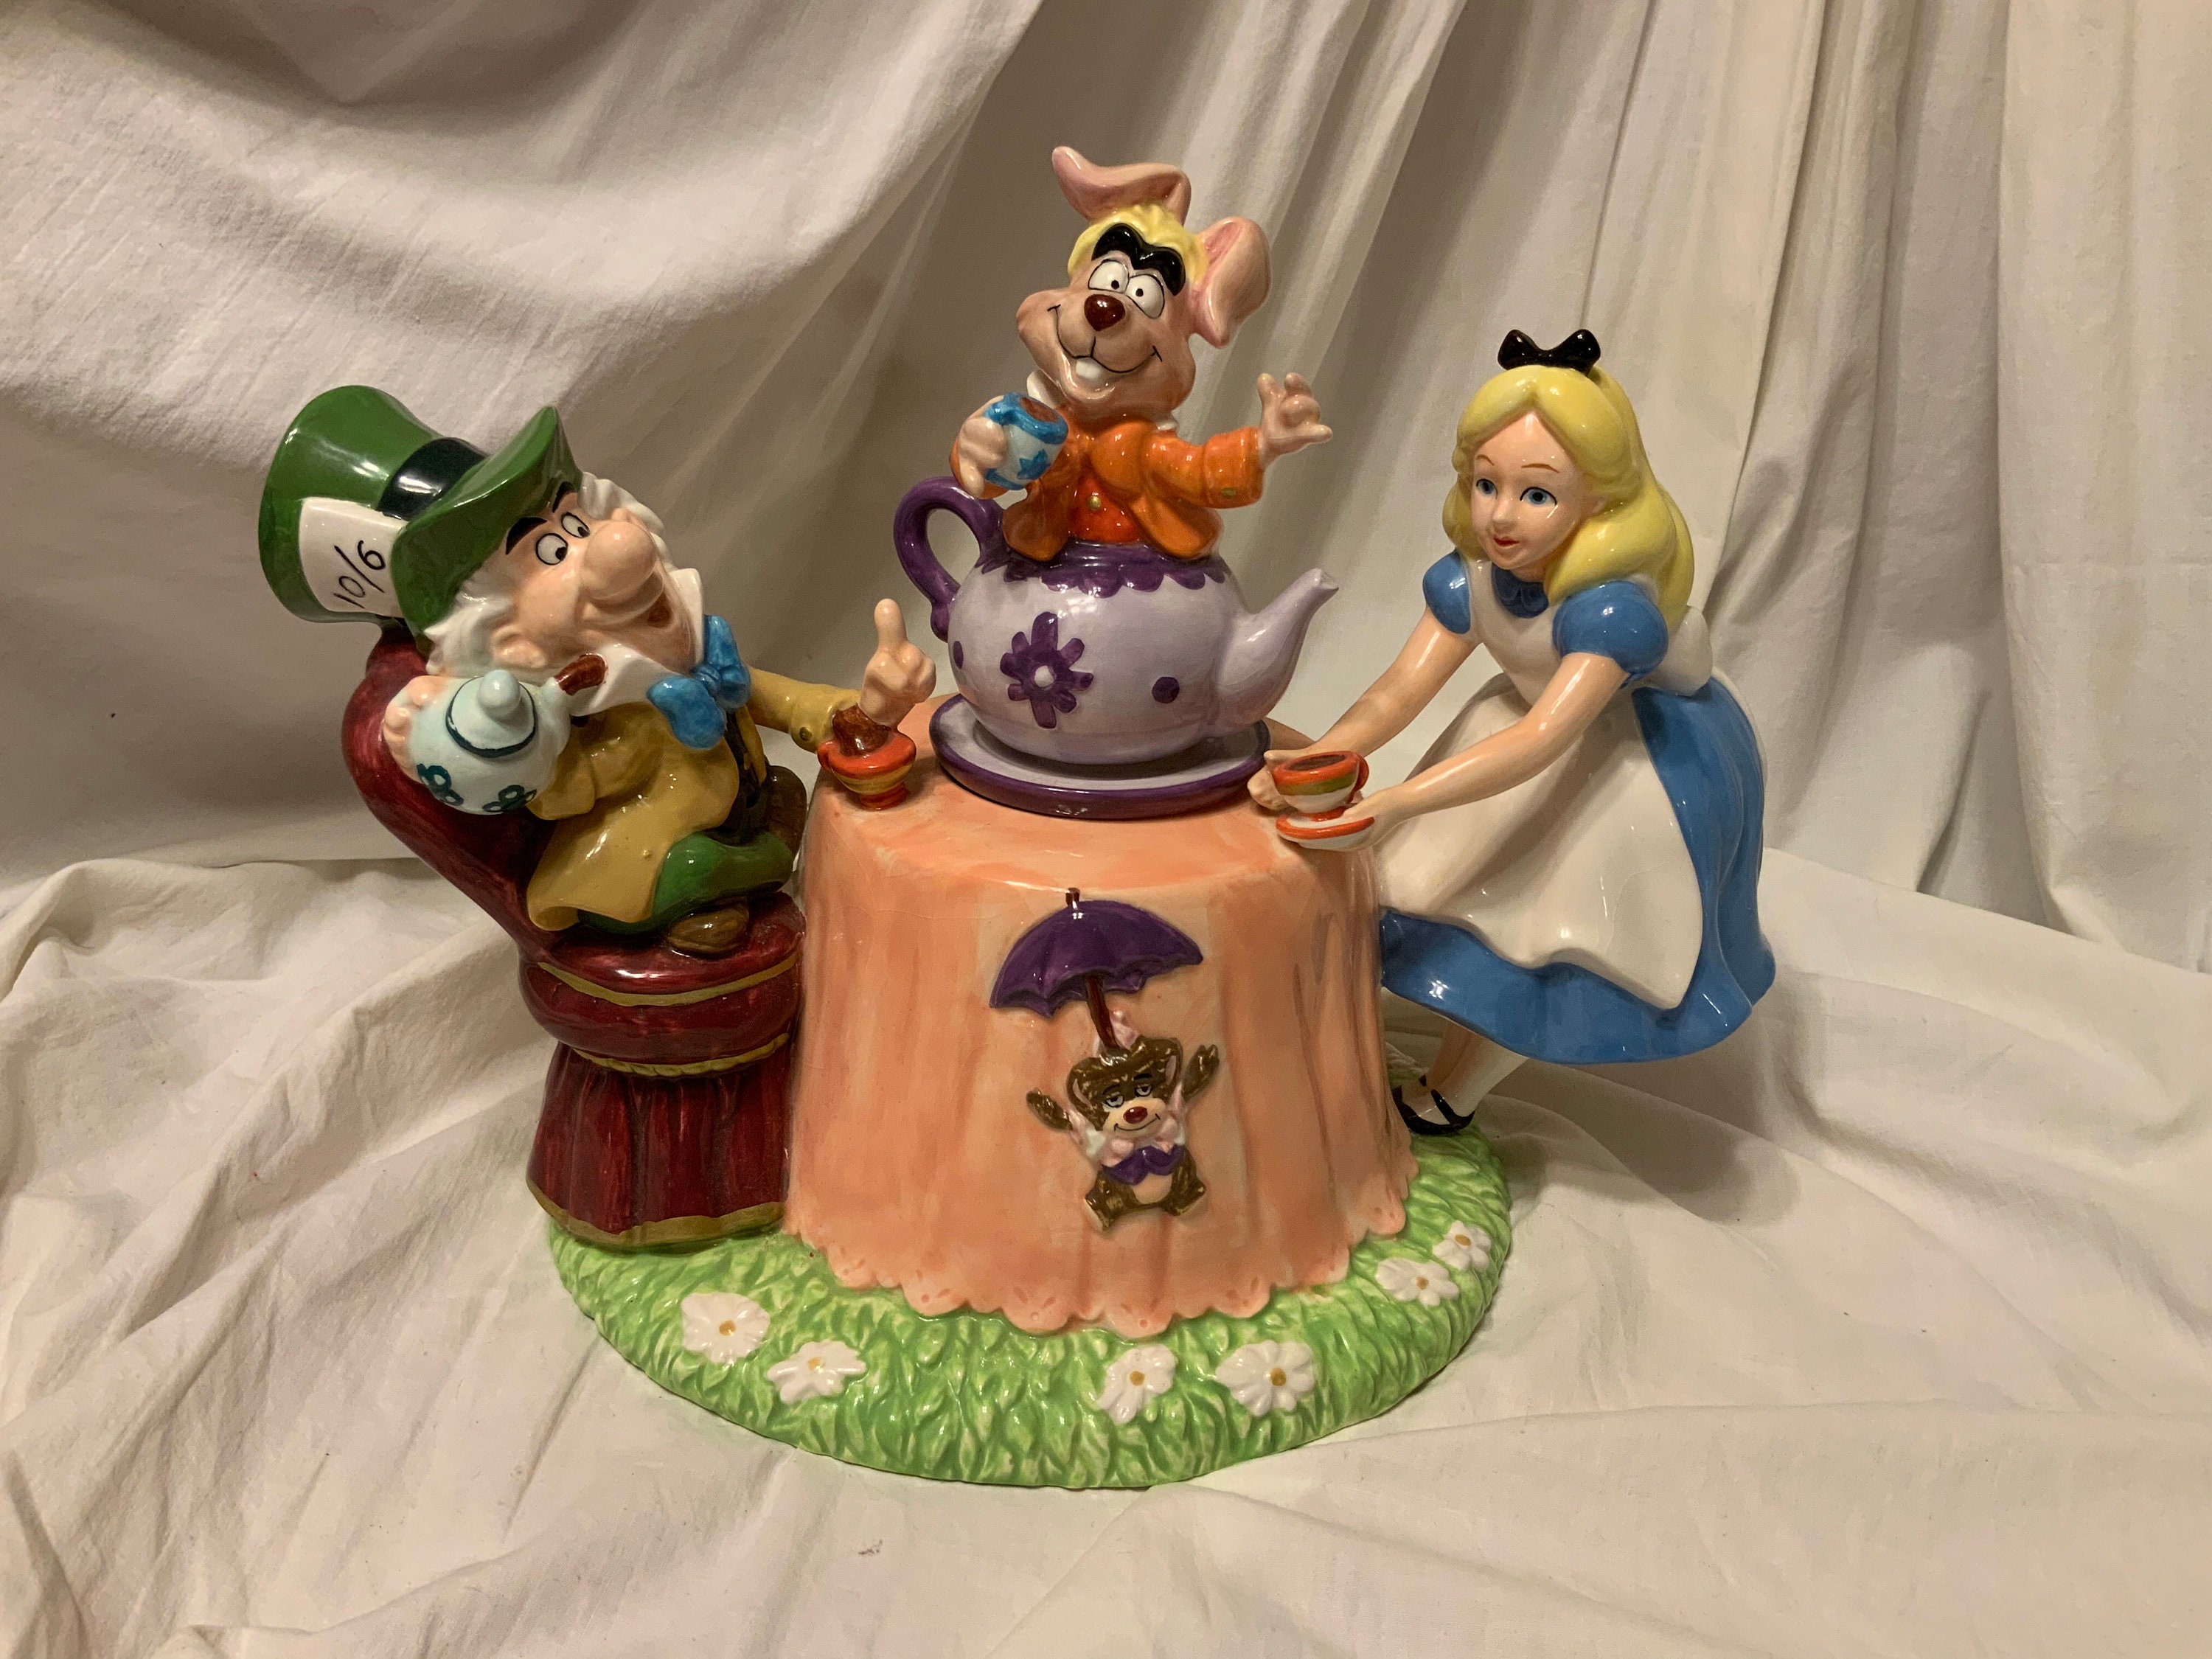 Disney Disney Characters World Collectible figures story.01 Alice in  Wonderland on all five sets